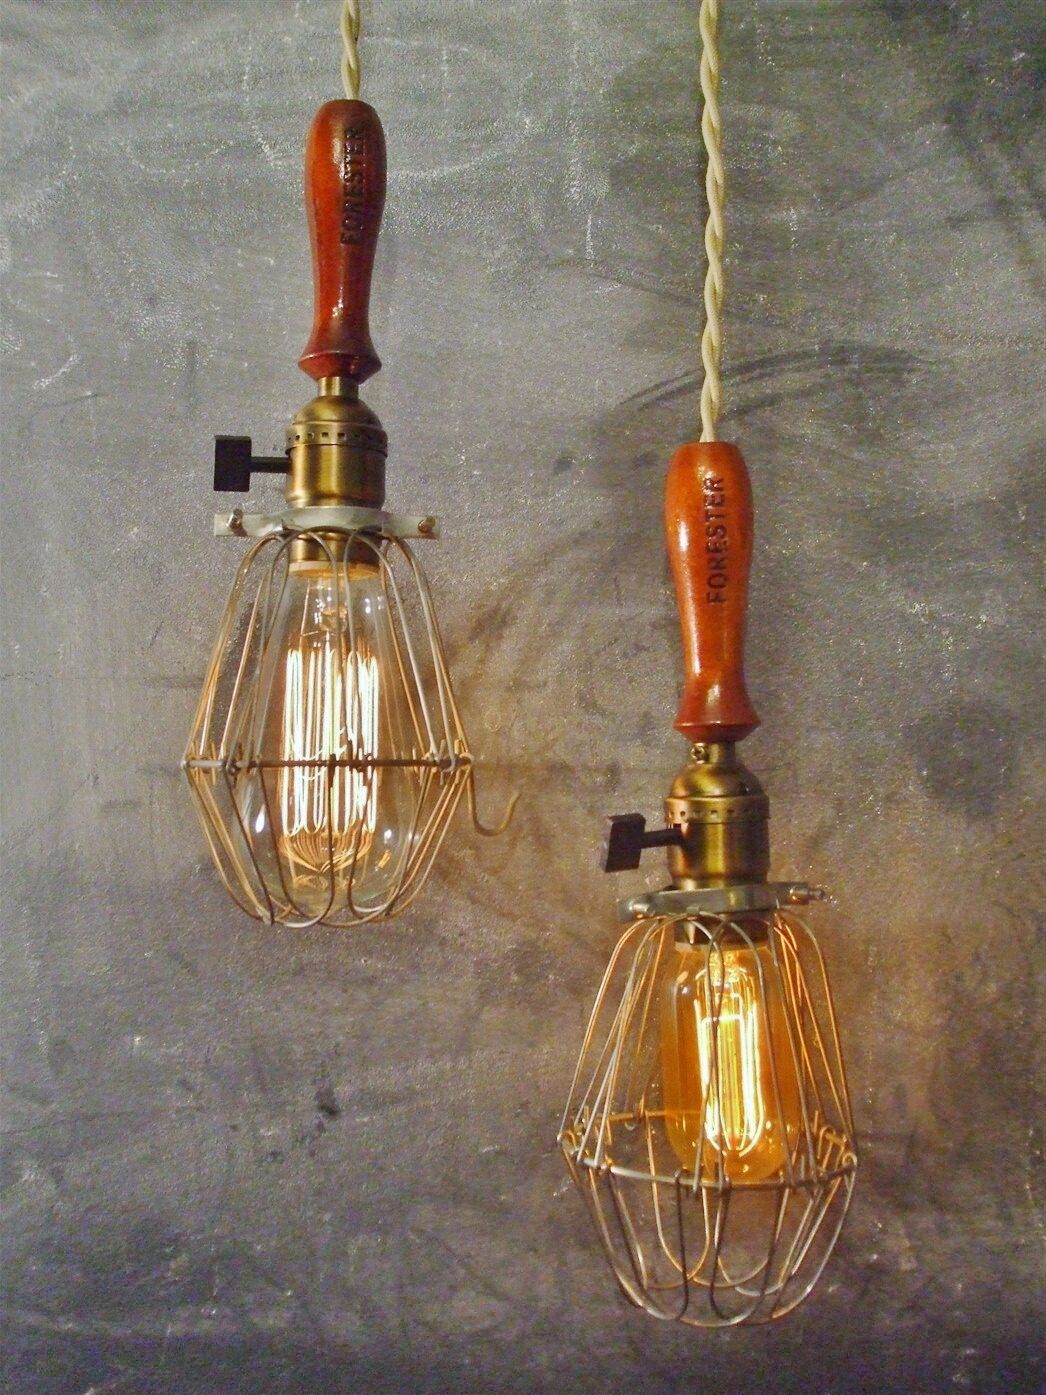 DOUBLE TROUBLE Set of 2 Vintage Industrial Trouble Lights - Bulb Cage Lamp 